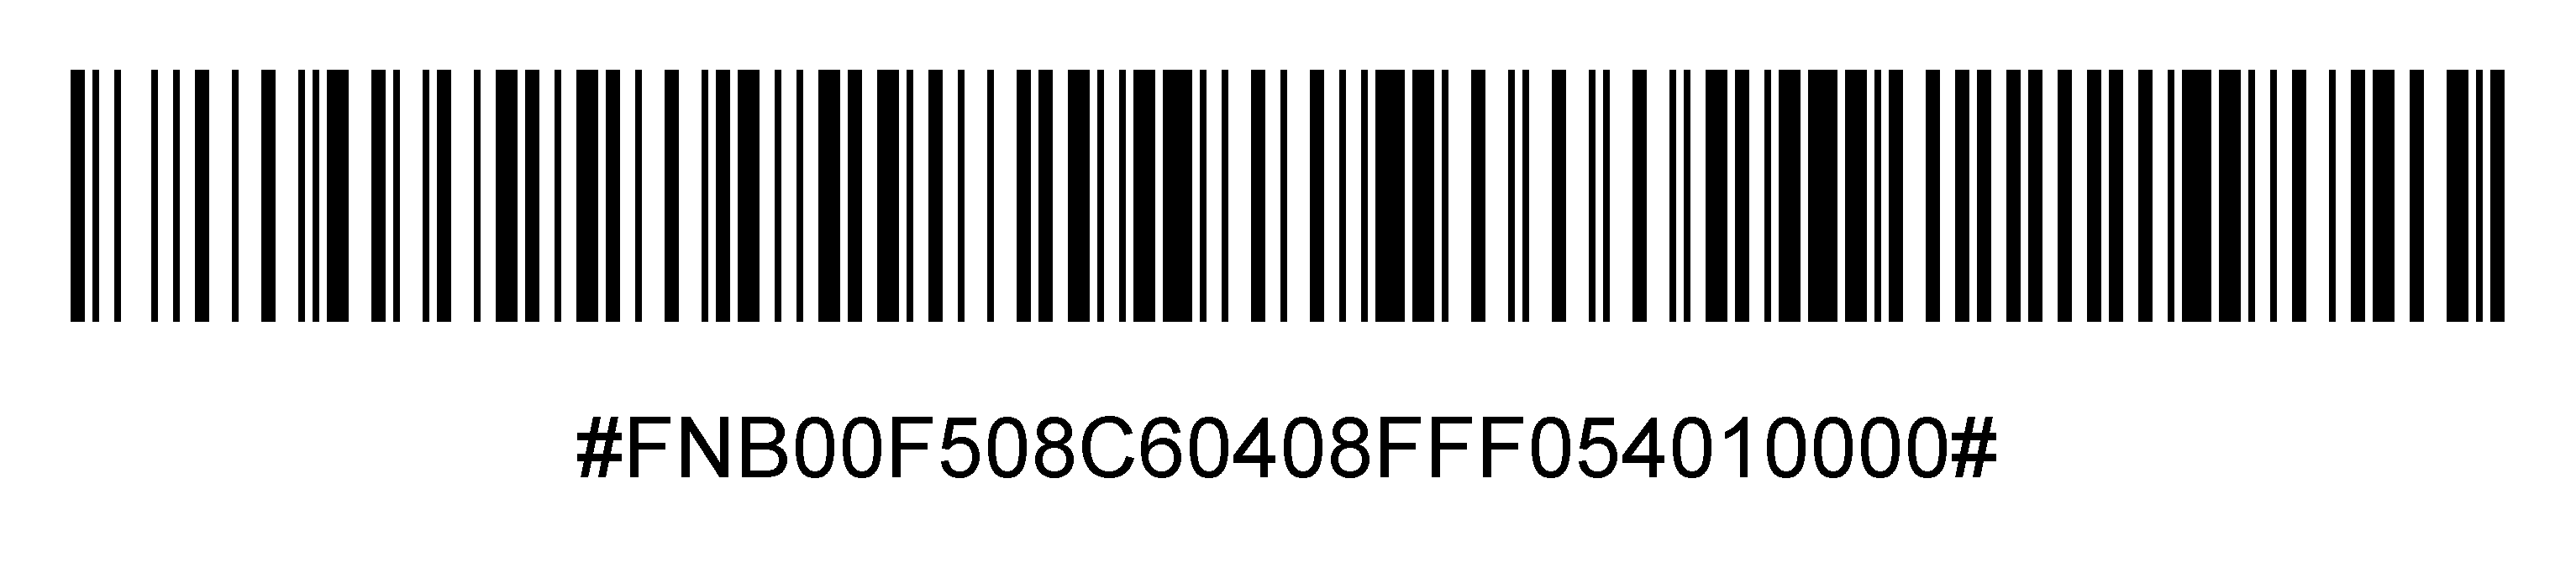 Enable GS1 DataBar Expanded Barcode